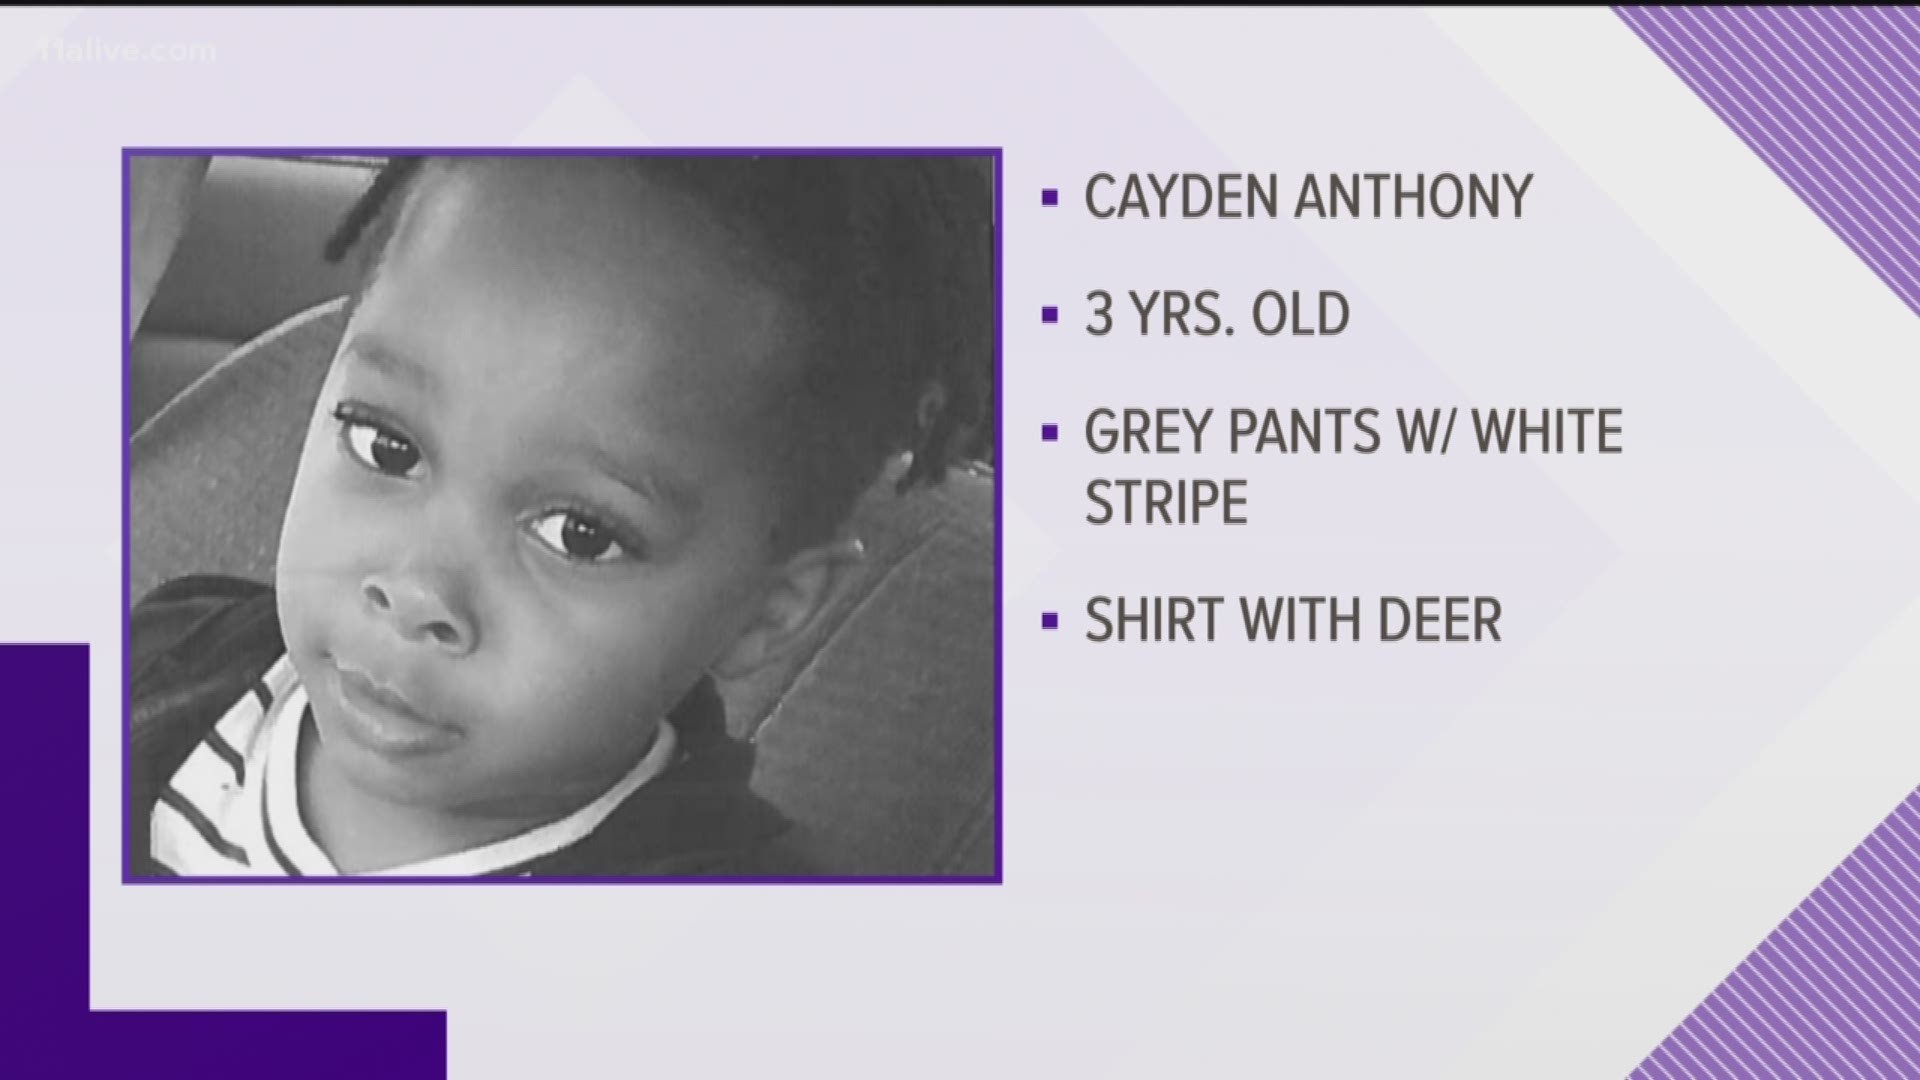 Levi's Call issued for possibly abducted 3-year-old 